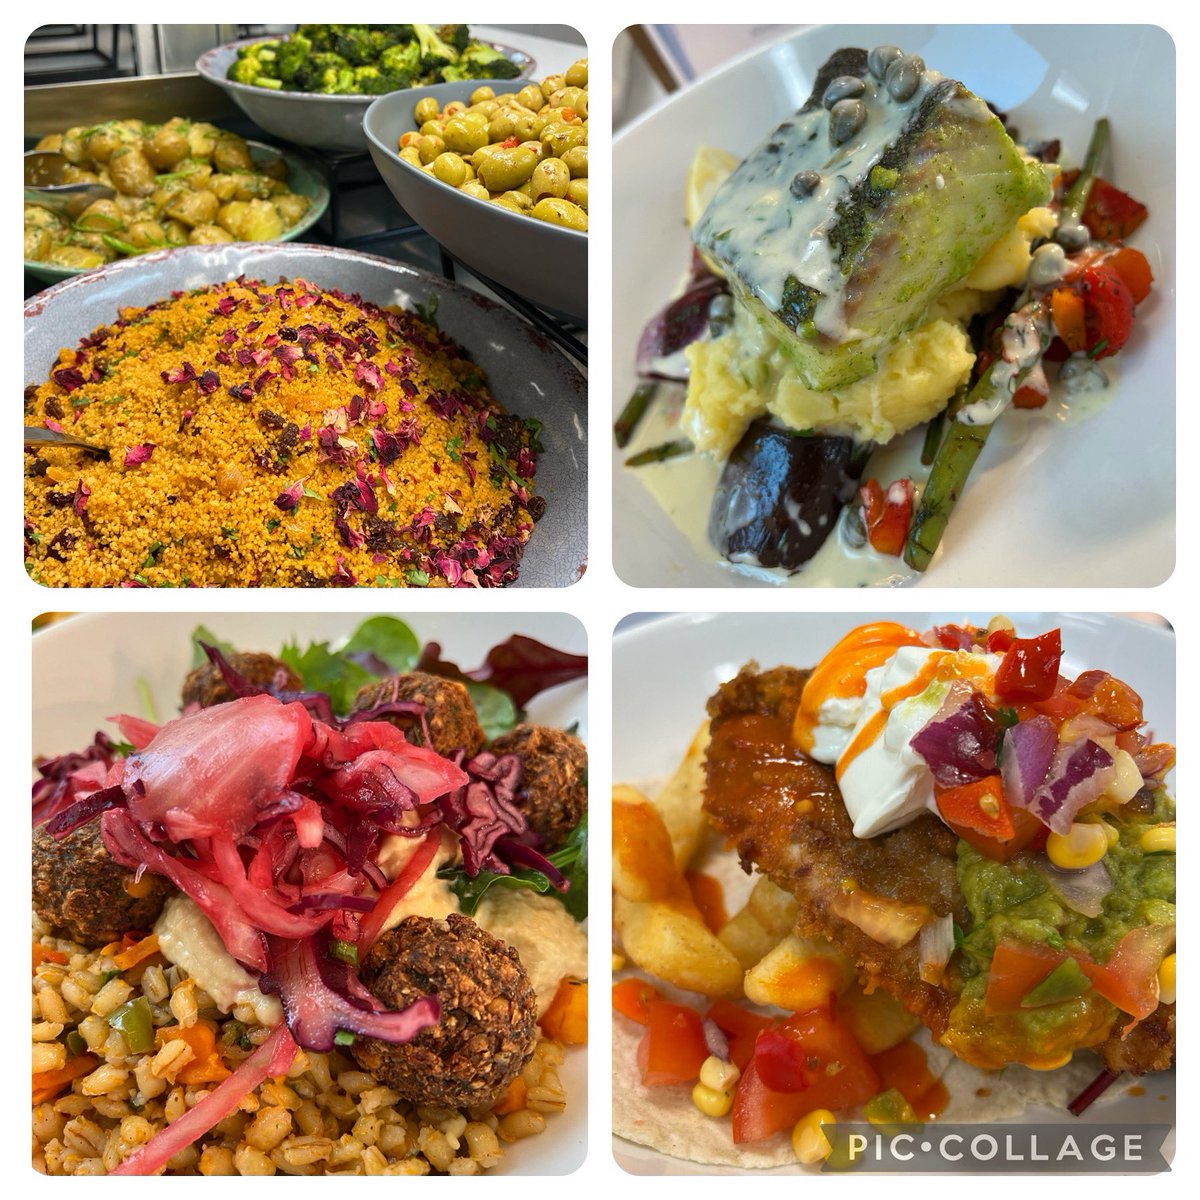 On todays menu in the EDUkitchen at St Peter’s: -Baked Cod Loin with Roasted Green Beans, Beetroot and Dill Caper Sauce -Falafel with Warm Pearl Barley, Humus and Pickled Onions -Southern Fried Chicken Taco with Sour Cream and Guac @LoveBritishFood #greathospitalfood